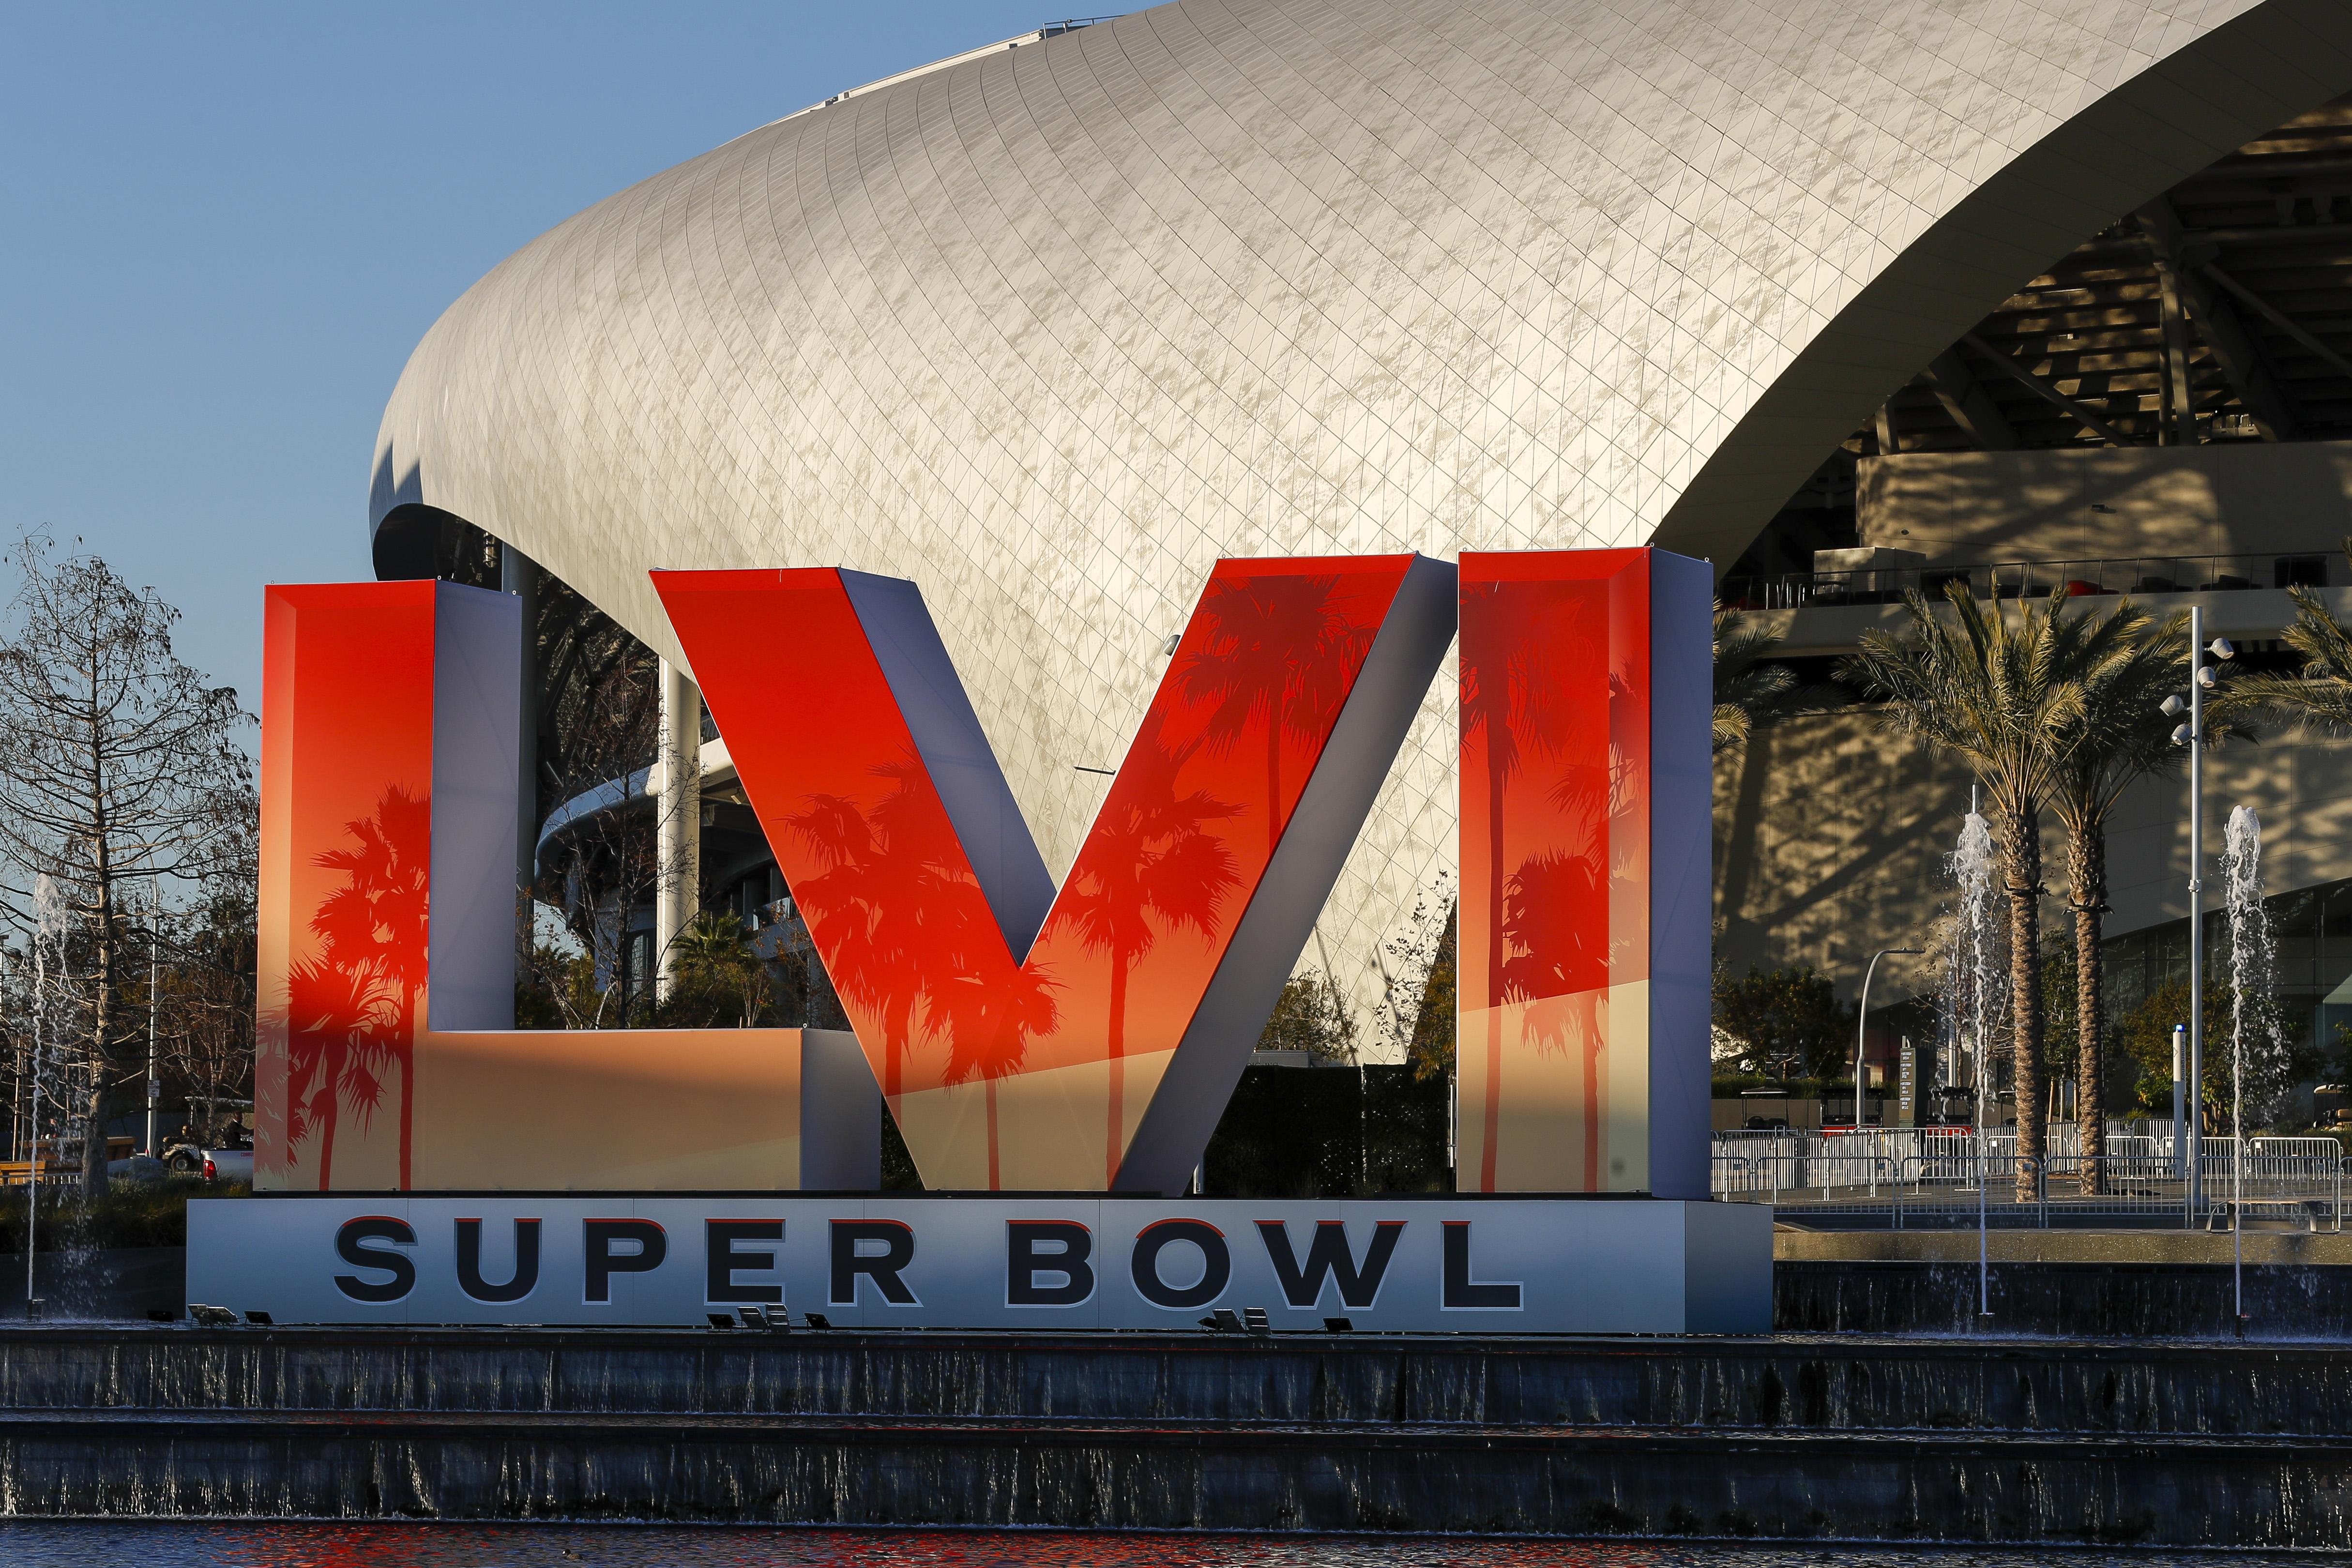 How to Watch the Super Bowl 2022 Halftime Show - Stream the Super Bowl LVI  Halftime Show